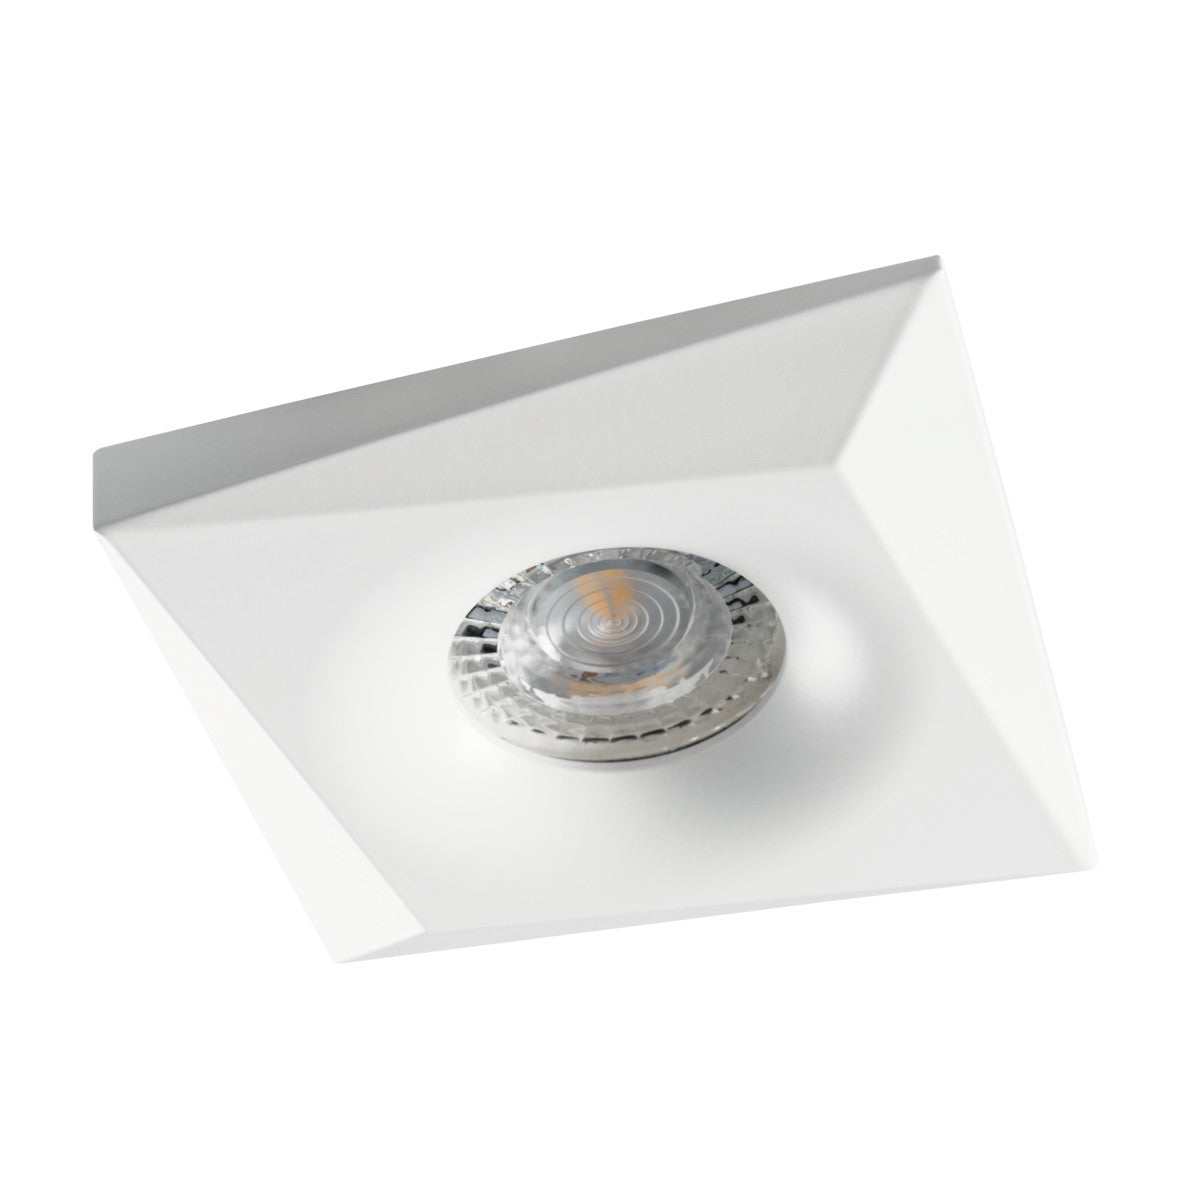 Kanlux BONIS Round Square Ceiling Recessed Mounted GU10 Spot Light Fitting